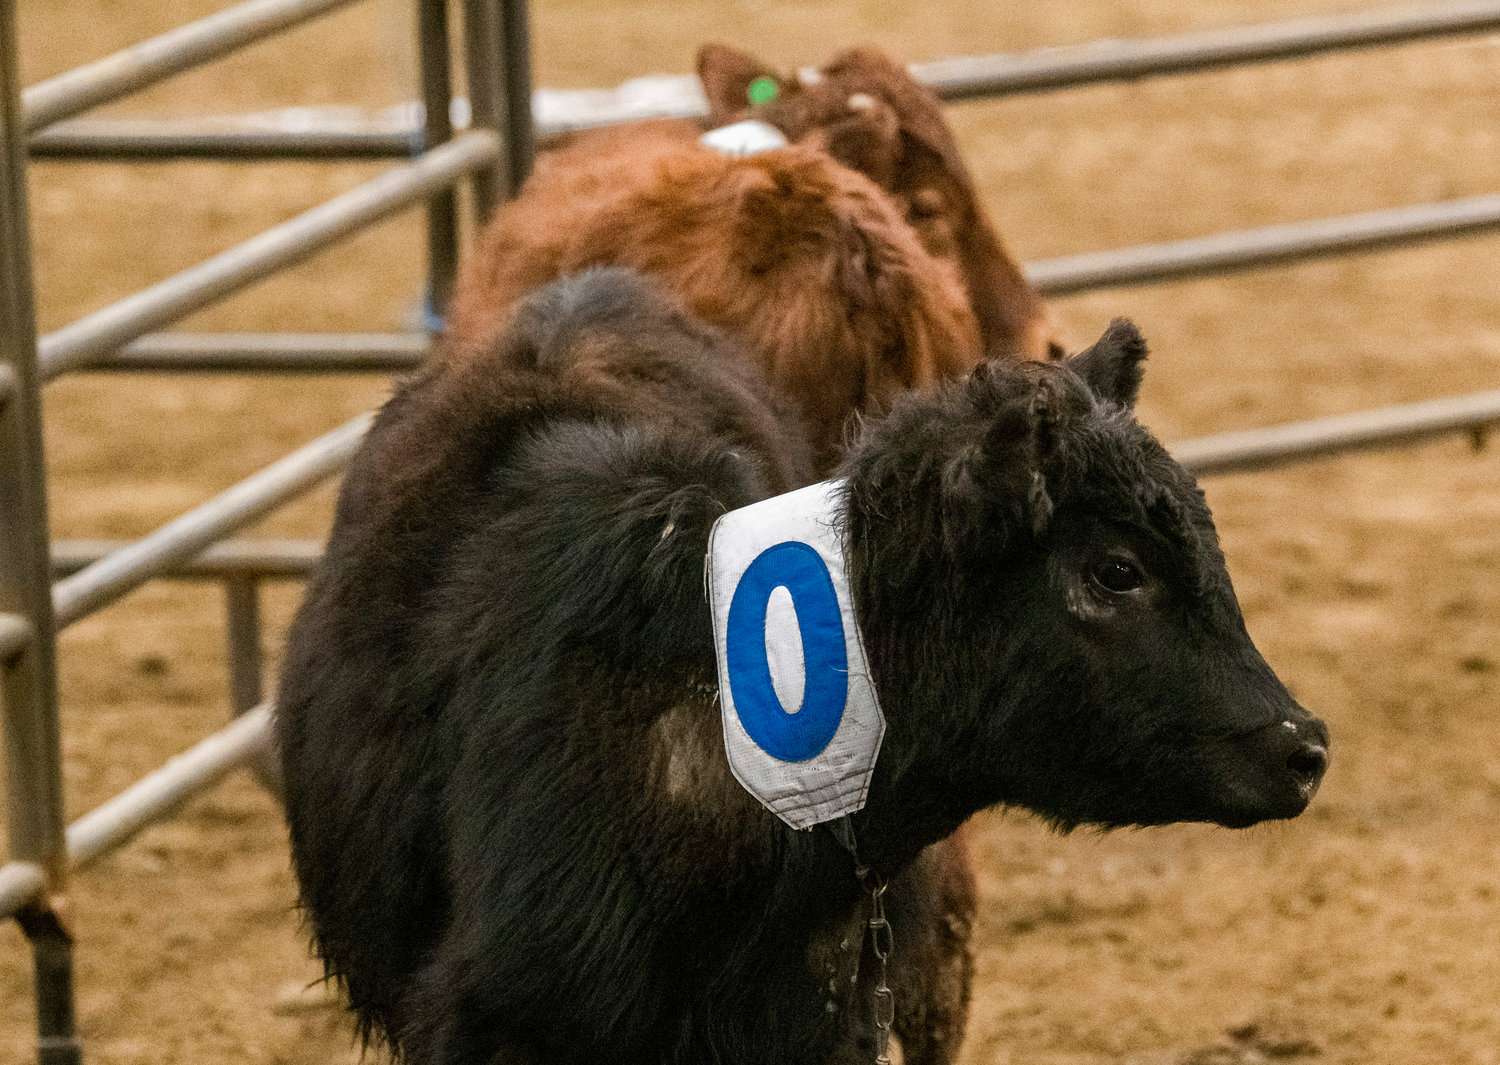 On Sunday, March 19 at the Grays Harbor County Fairgrounds, cows are numbered for a team sorting equestrian event.